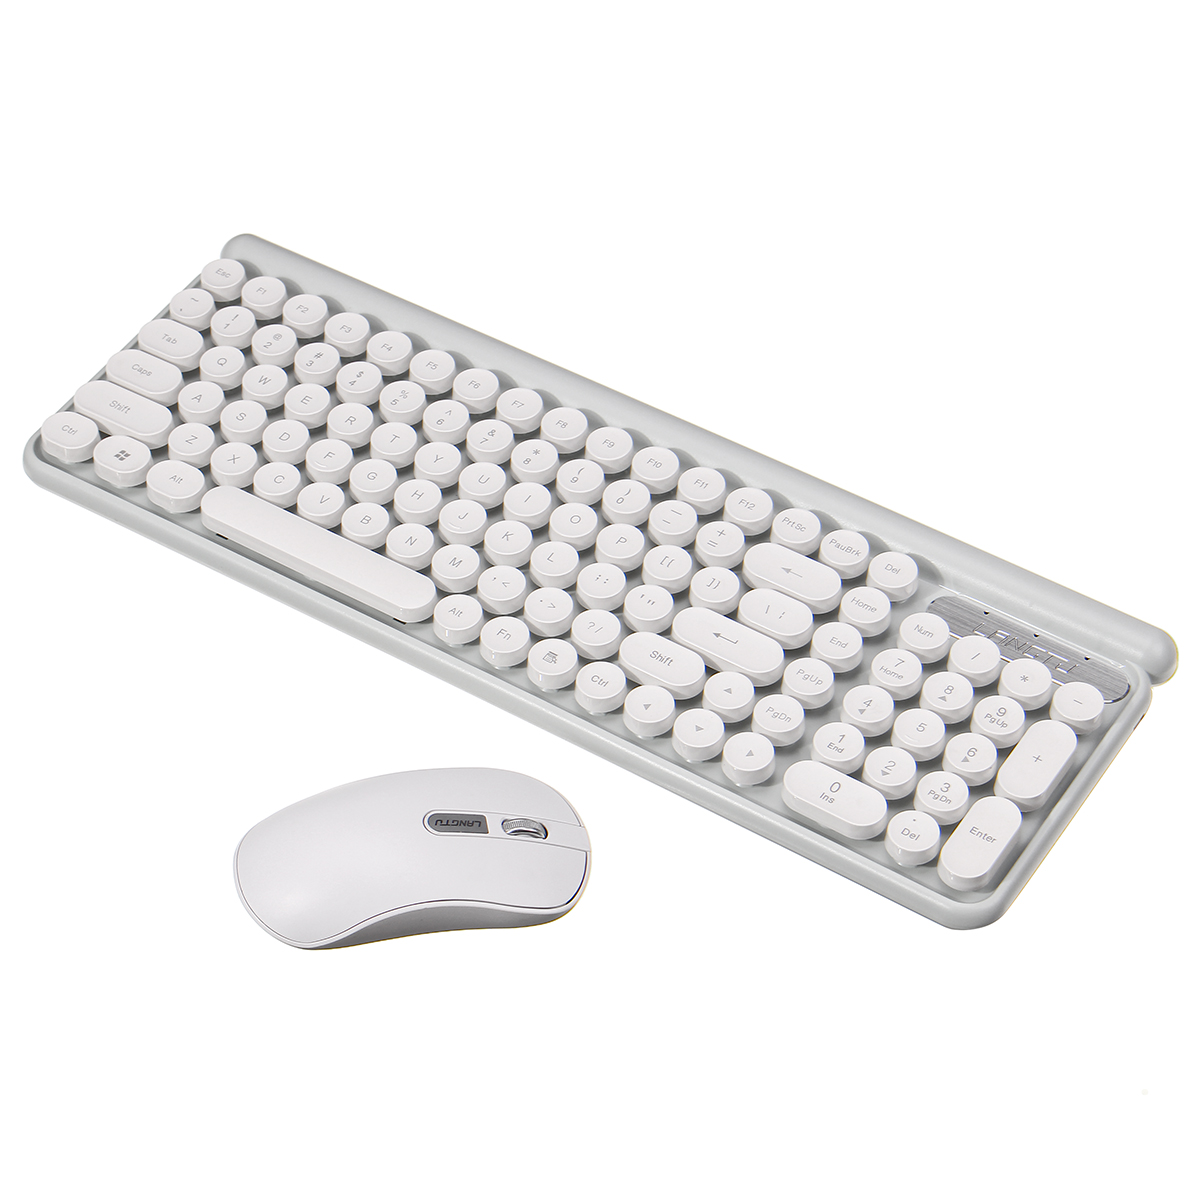 

LT400 Rechargeable 2.4G Wireless Ultra-thin Keyboard and Mouse Combo